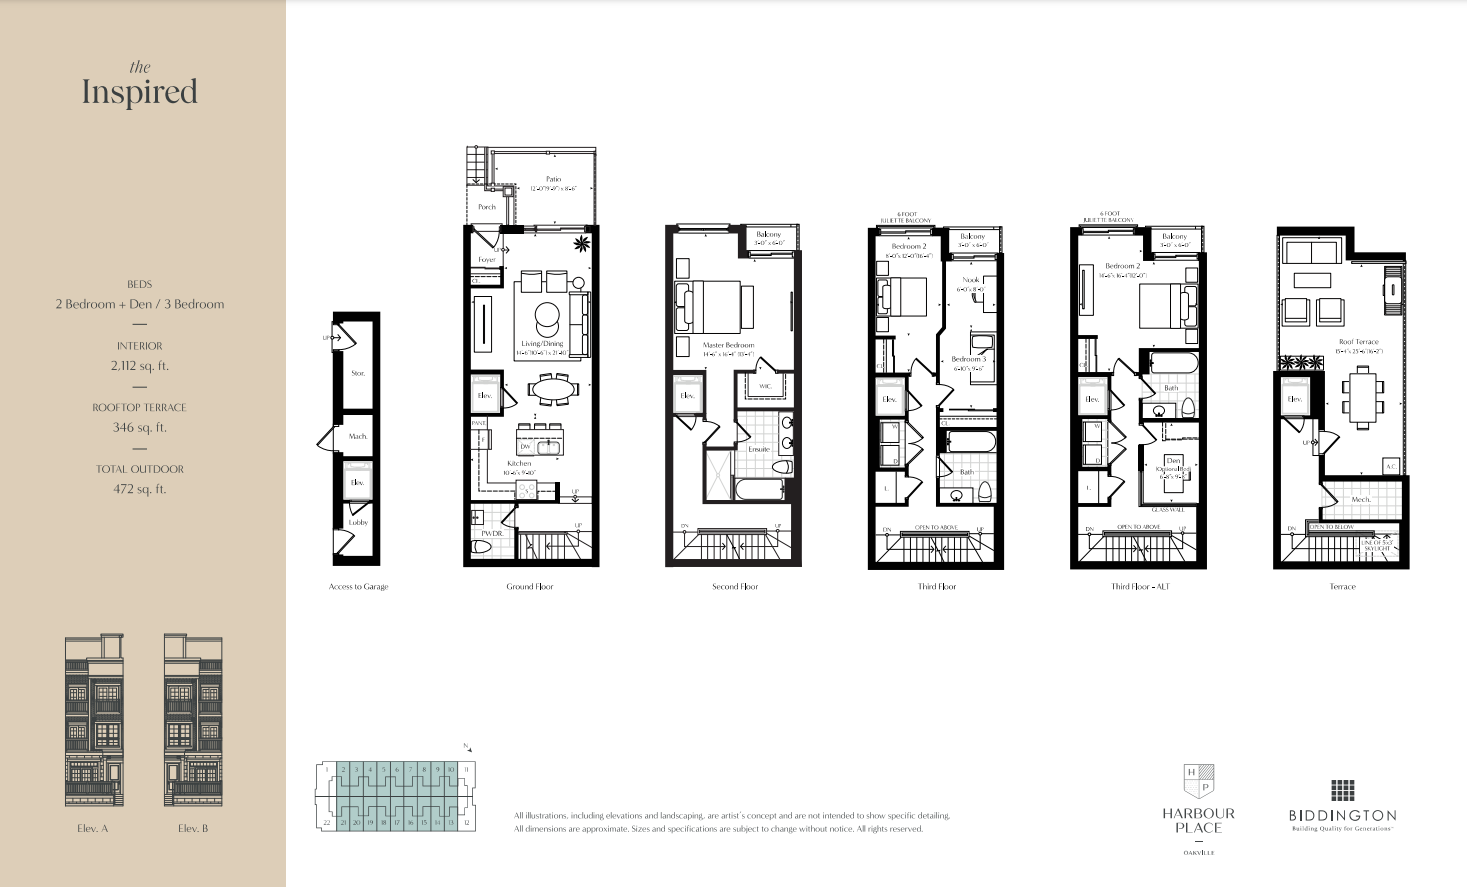  Floor Plan of Harbour Place Towns with undefined beds